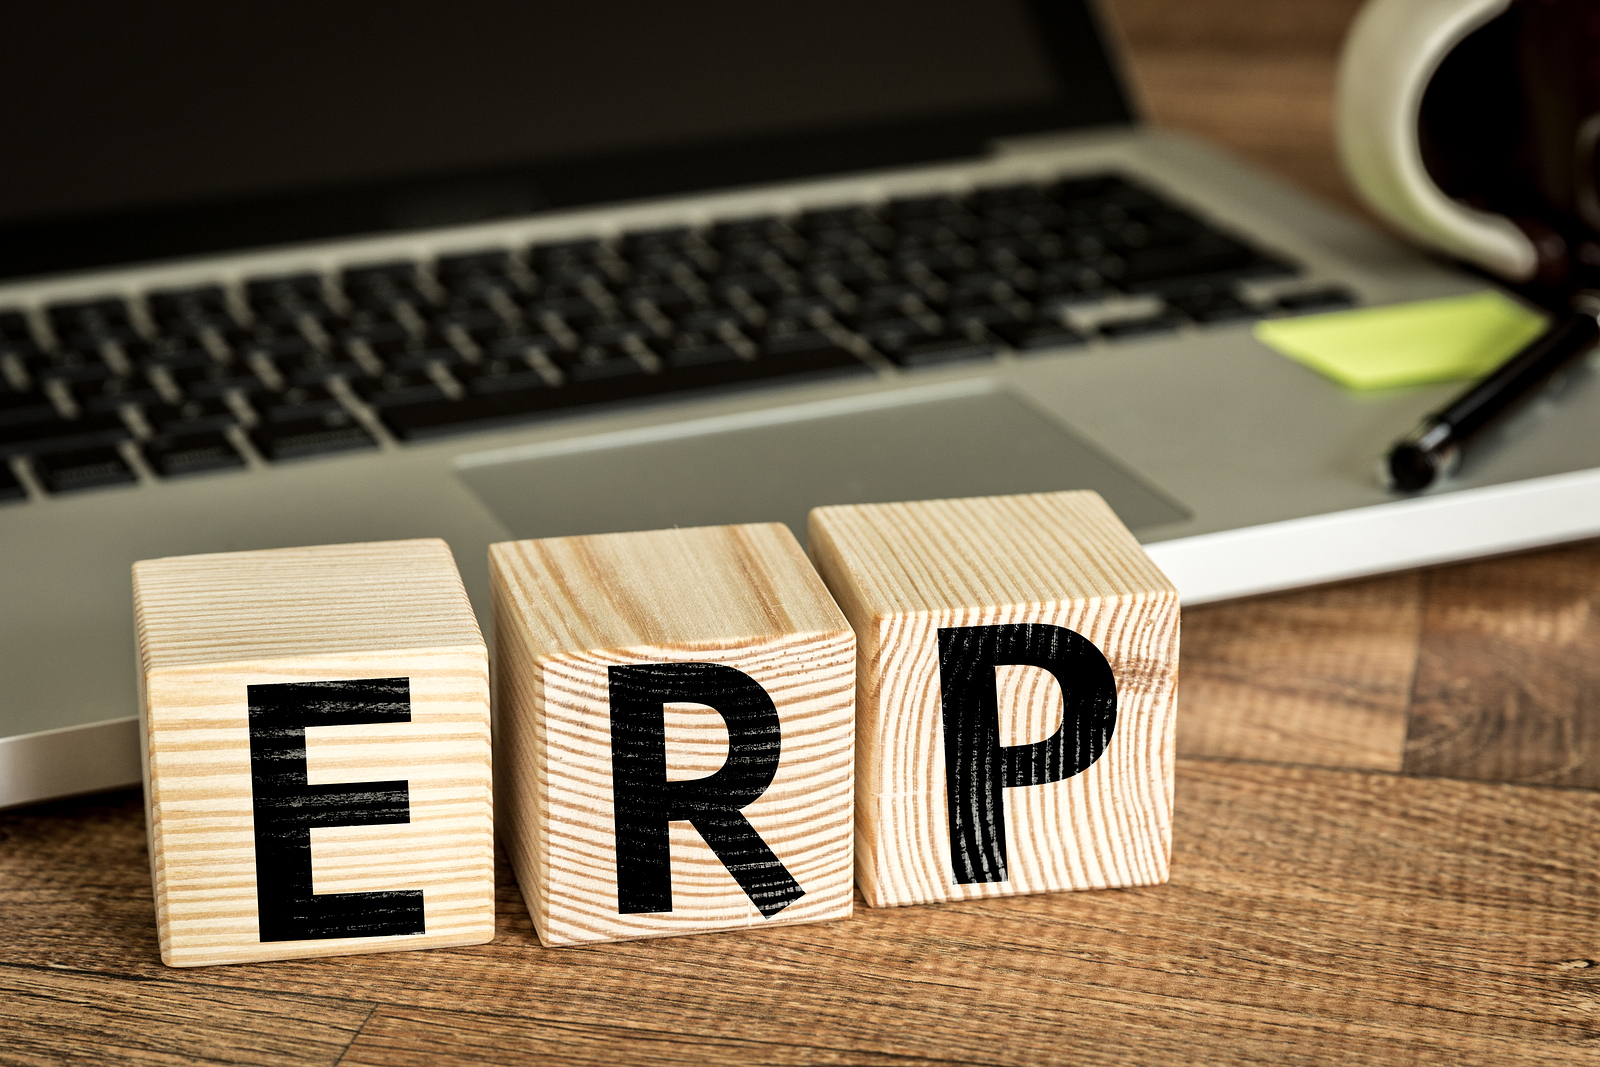 ERP systems